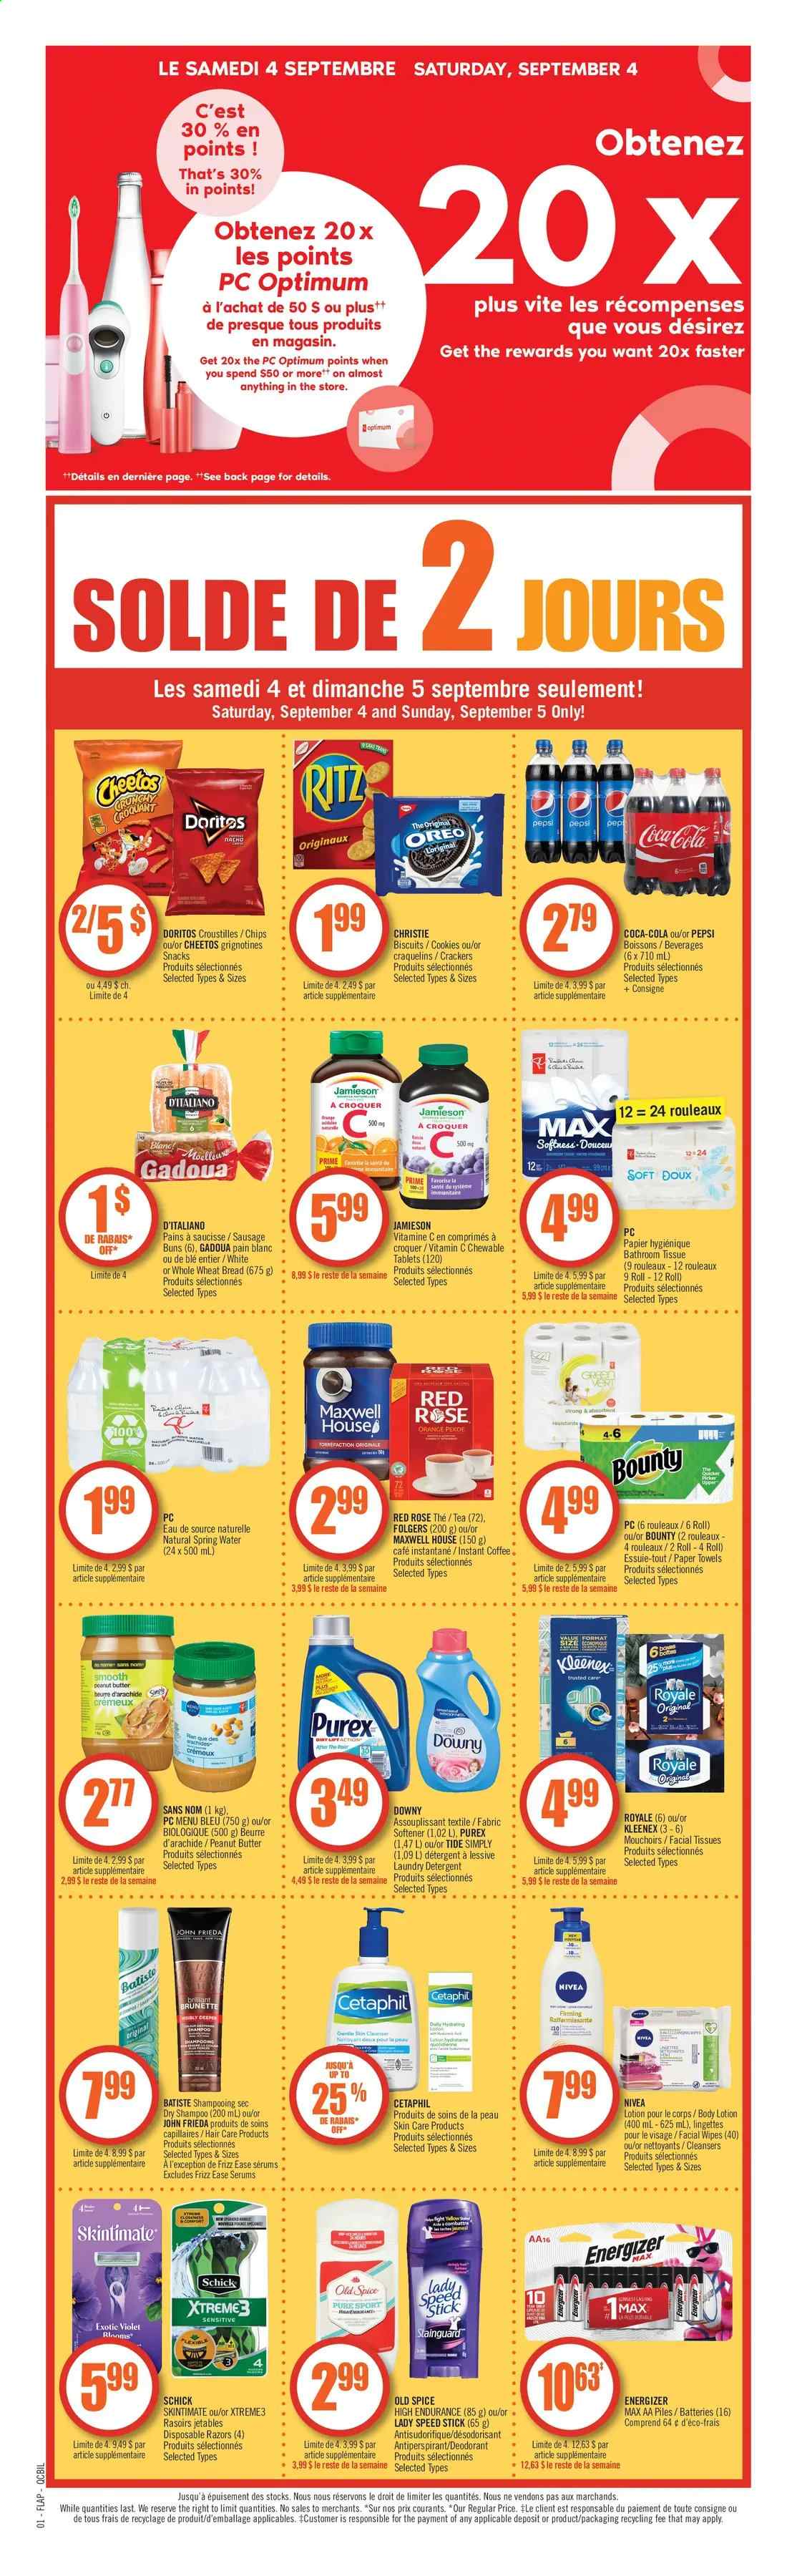 thumbnail - Pharmaprix Flyer - September 04, 2021 - September 10, 2021 - Sales products - wheat bread, buns, sausage, cookies, snack, Bounty, crackers, biscuit, RITZ, Doritos, Cheetos, spice, Coca-Cola, Pepsi, spring water, Maxwell House, tea, instant coffee, Folgers, wine, rosé wine, wipes, bath tissue, Kleenex, kitchen towels, paper towels, Tide, fabric softener, laundry detergent, Purex, facial tissues, John Frieda, body lotion, anti-perspirant, Speed Stick, Schick, disposable razor, battery, rose, vitamin c, Oreo, detergent, Energizer, shampoo, Nivea, Old Spice, chips, oranges, deodorant. Page 17.